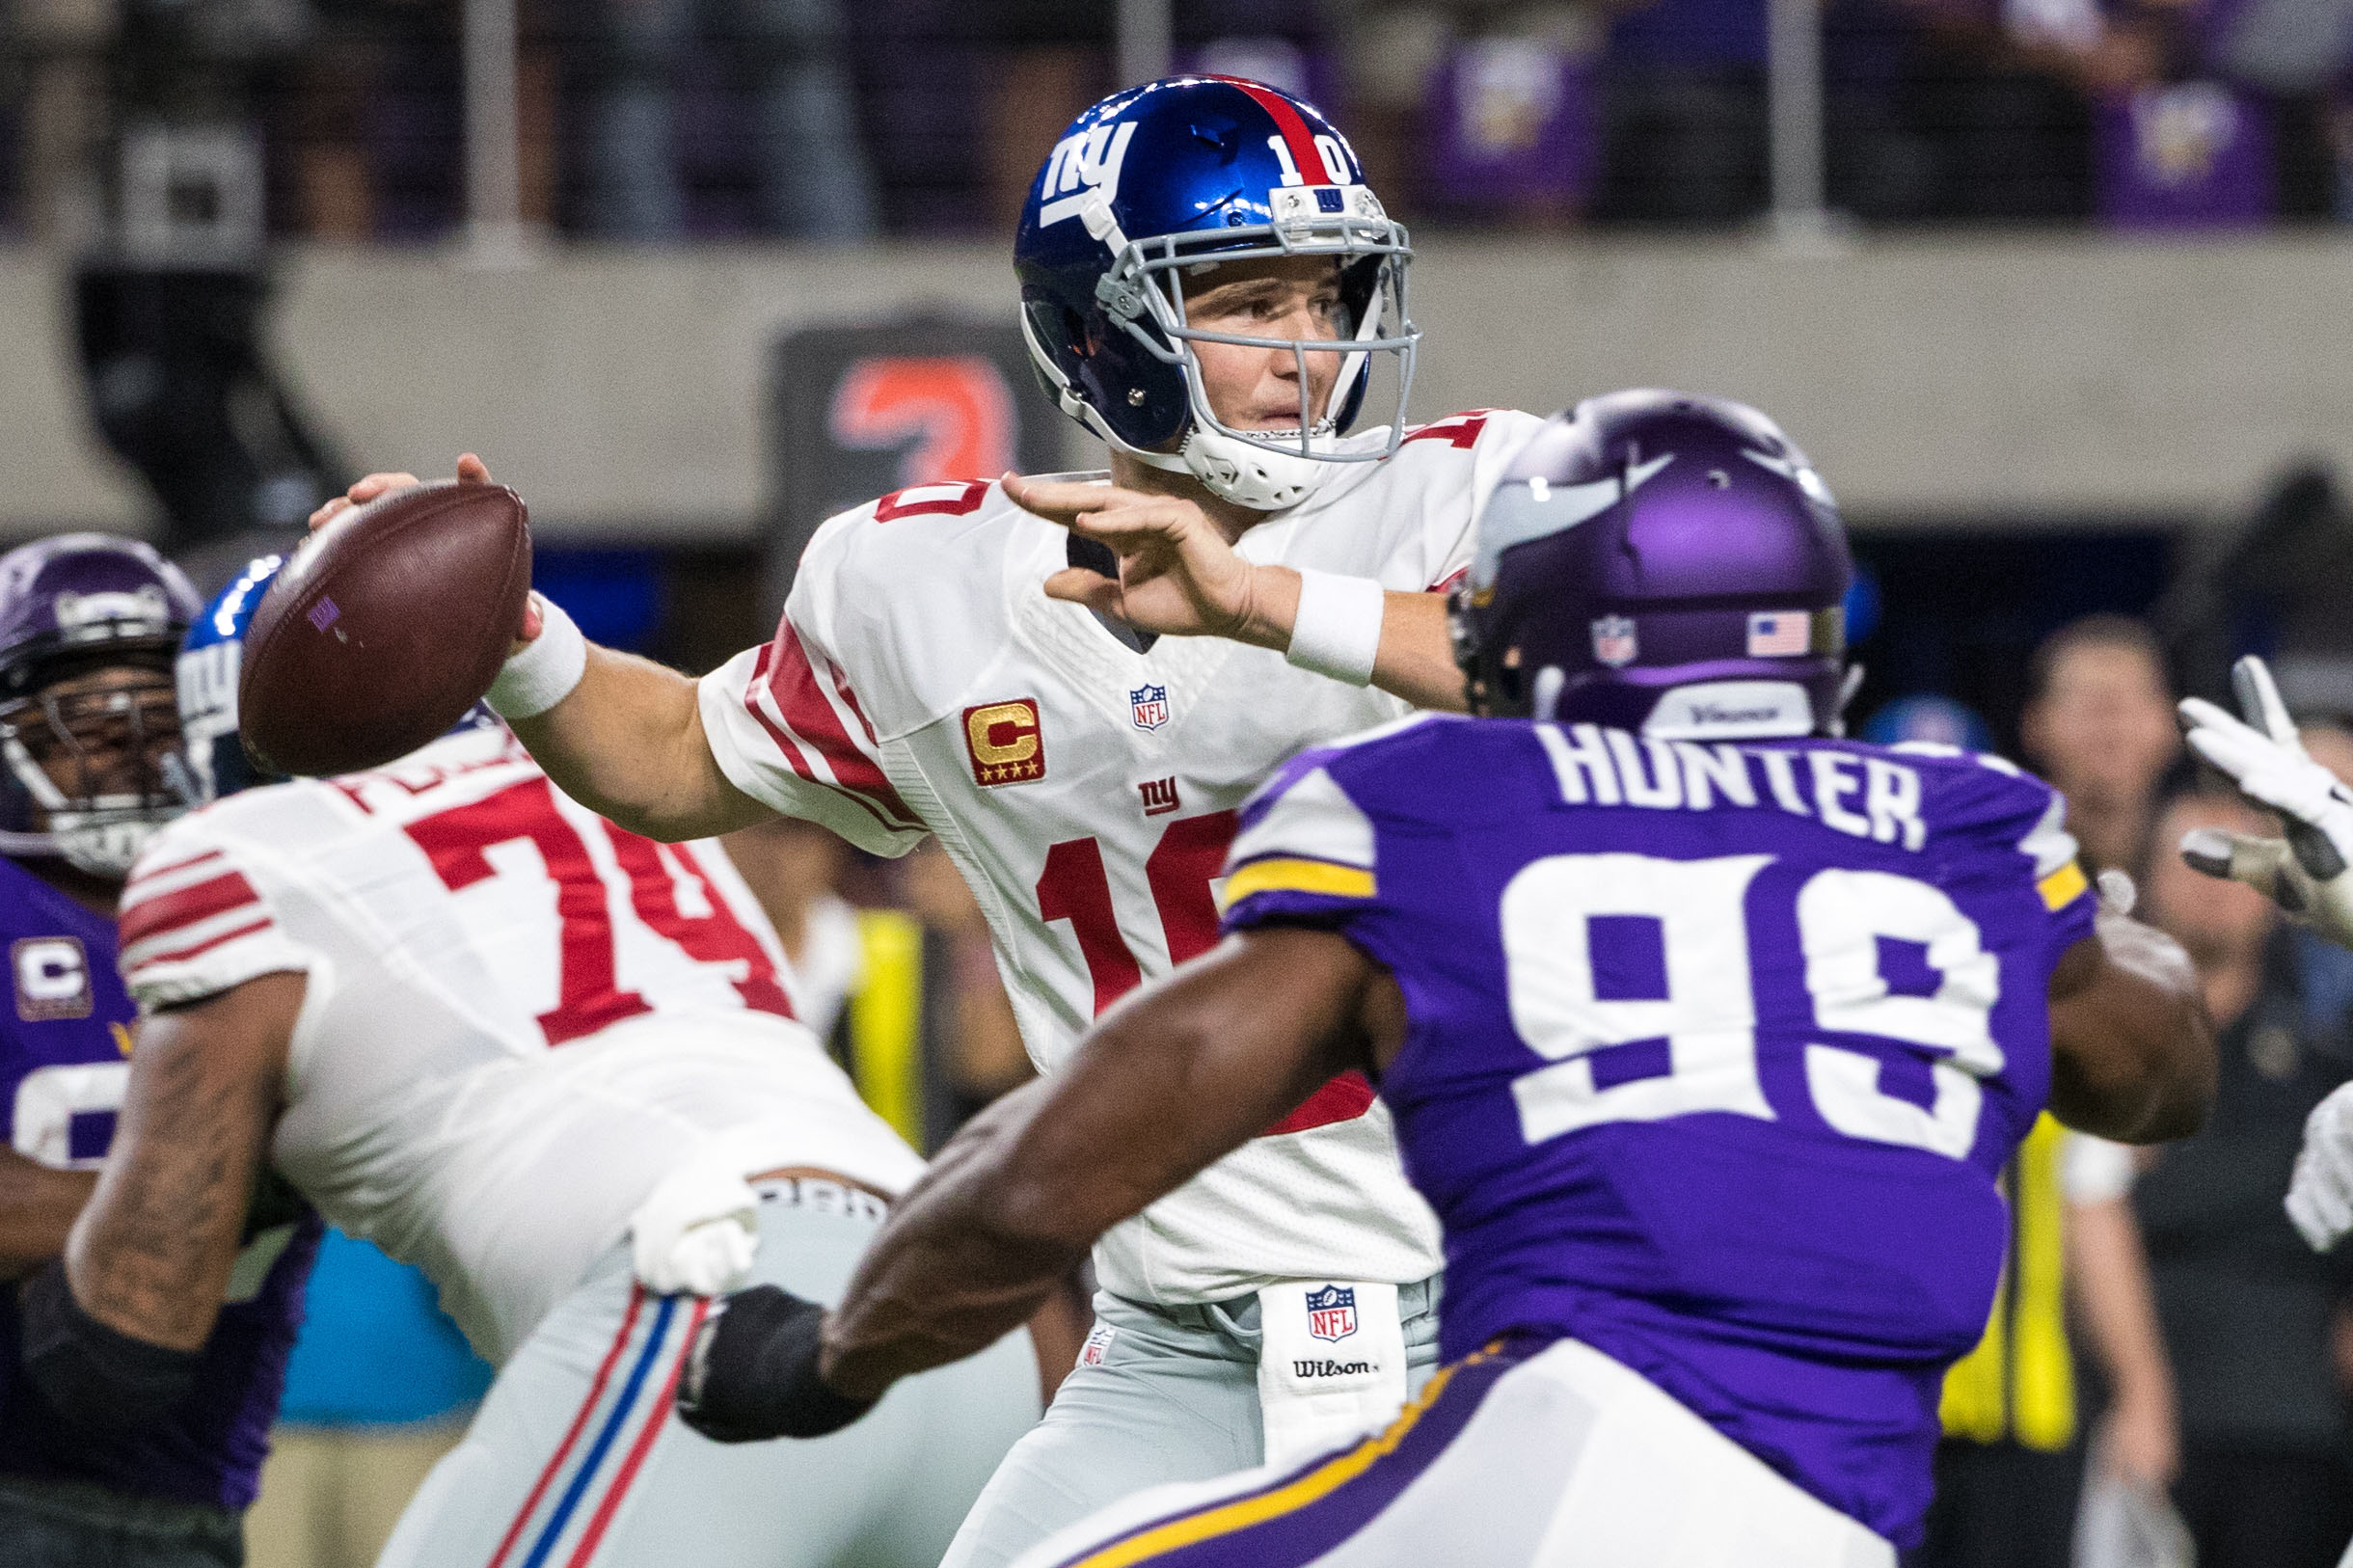 ESNY Film Room: The Reason Eli Manning, New York Giants Don't Attack Downfield 1